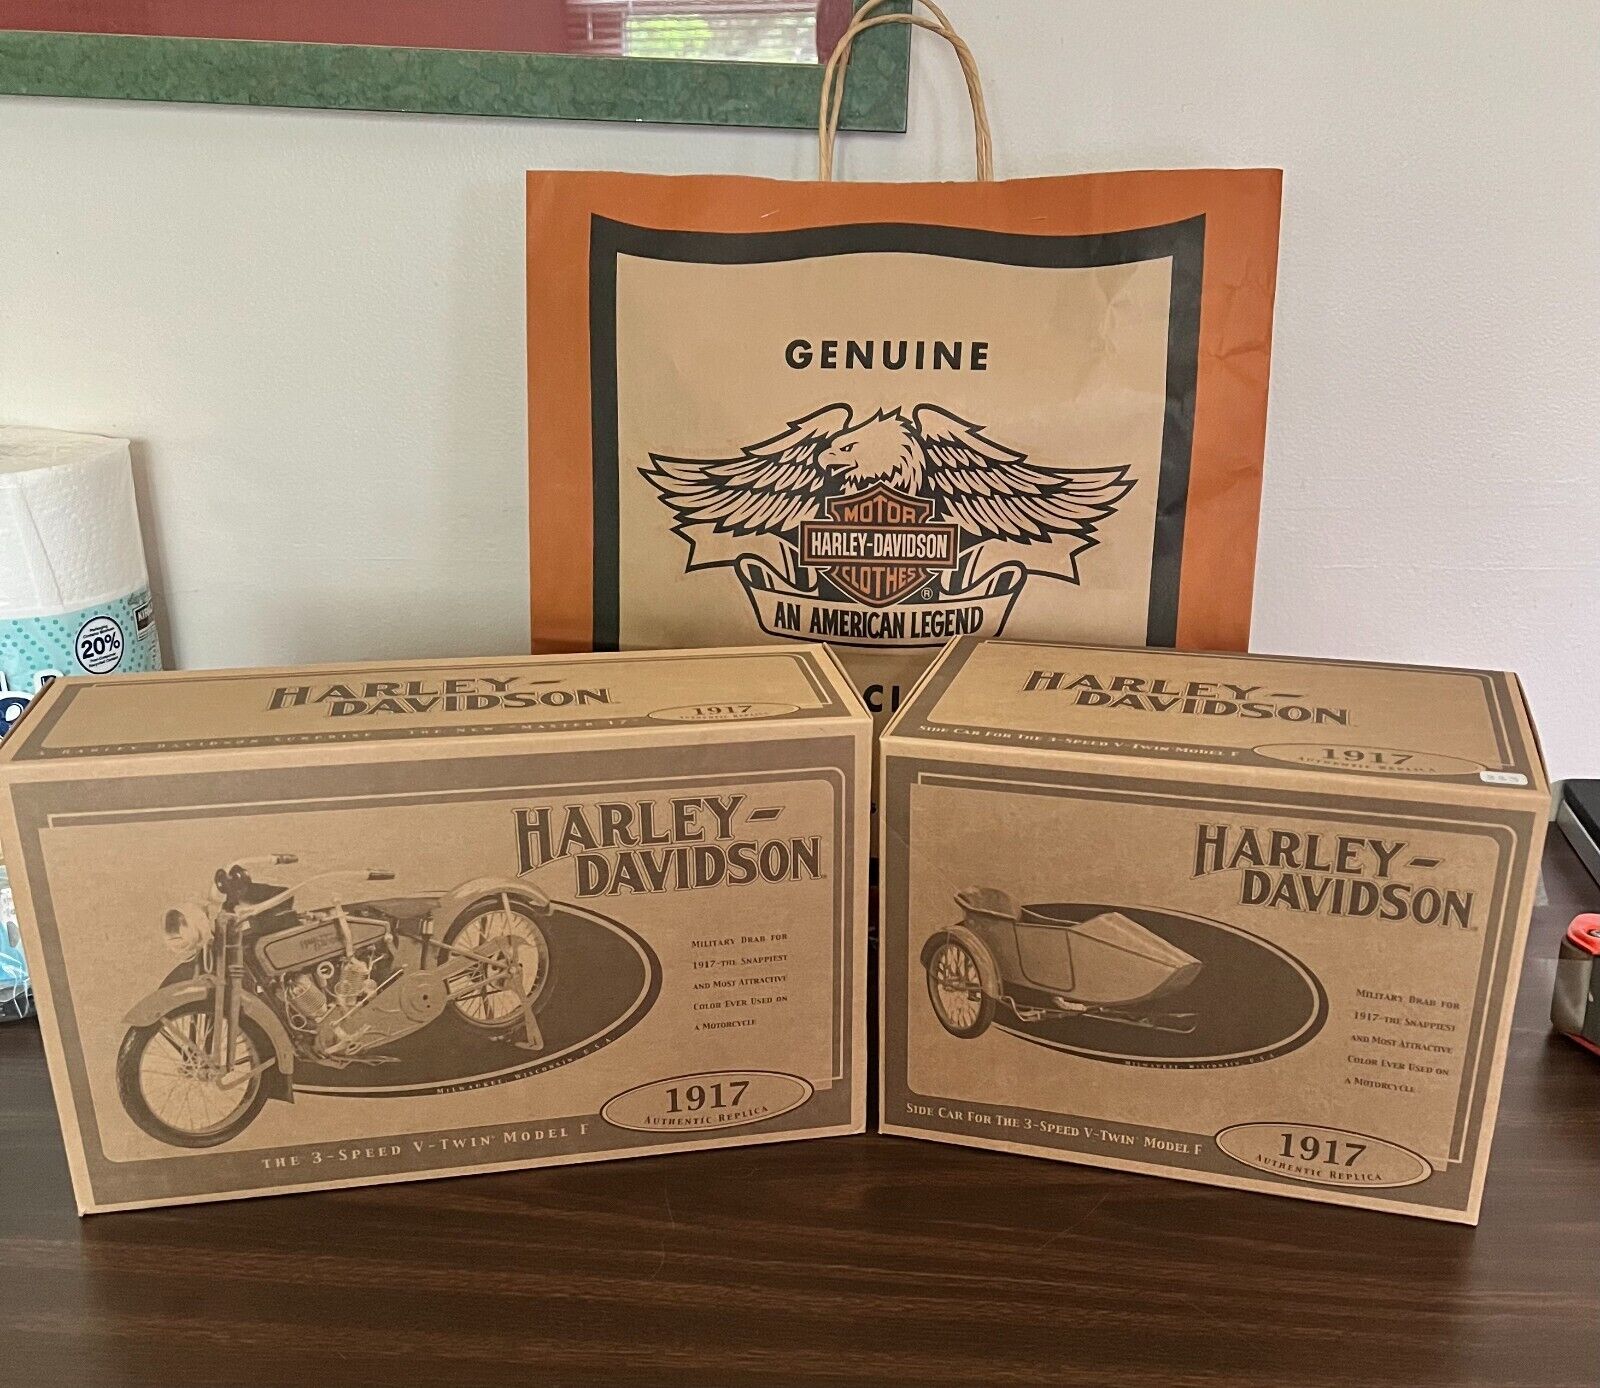 1917 Harley-Davidson. Authentic 3-Speed V-Twin W/ Side Car, Boxes & Bag